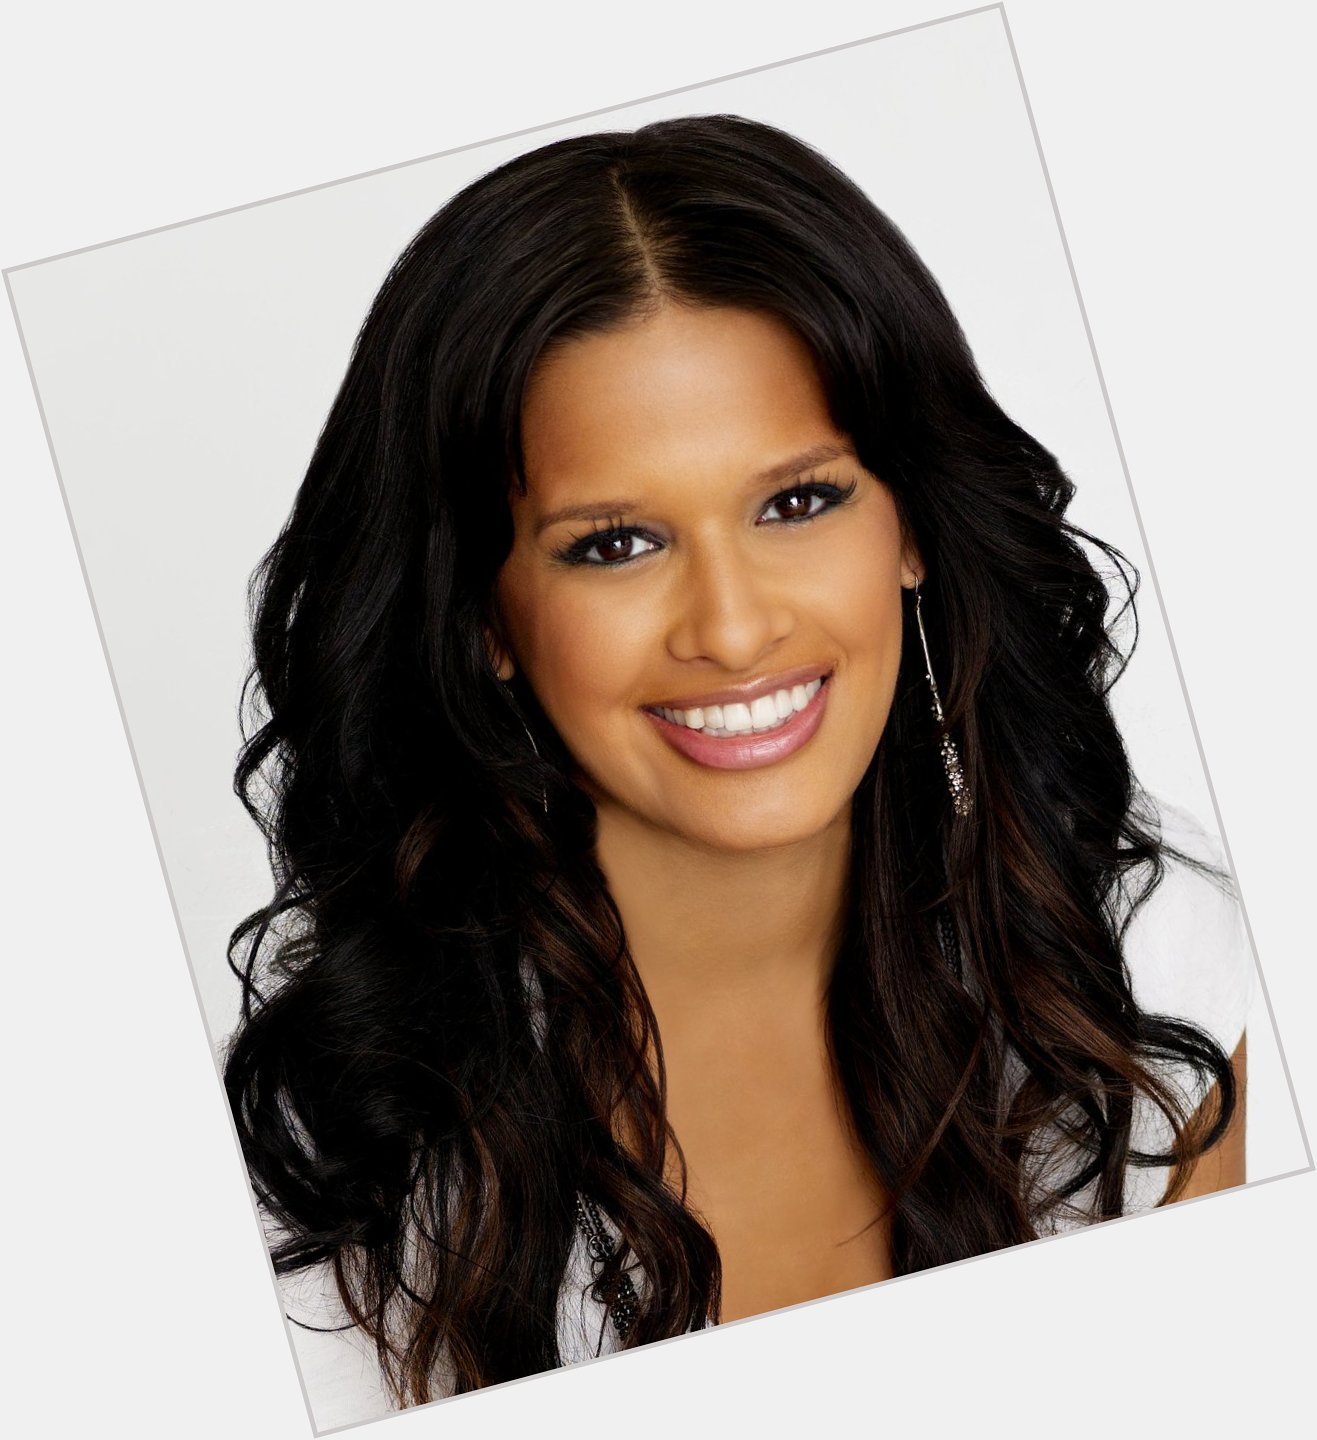 Happy birthday to former 106 and Park host and radio personality Rocsi Diaz who turns 32 years old today 